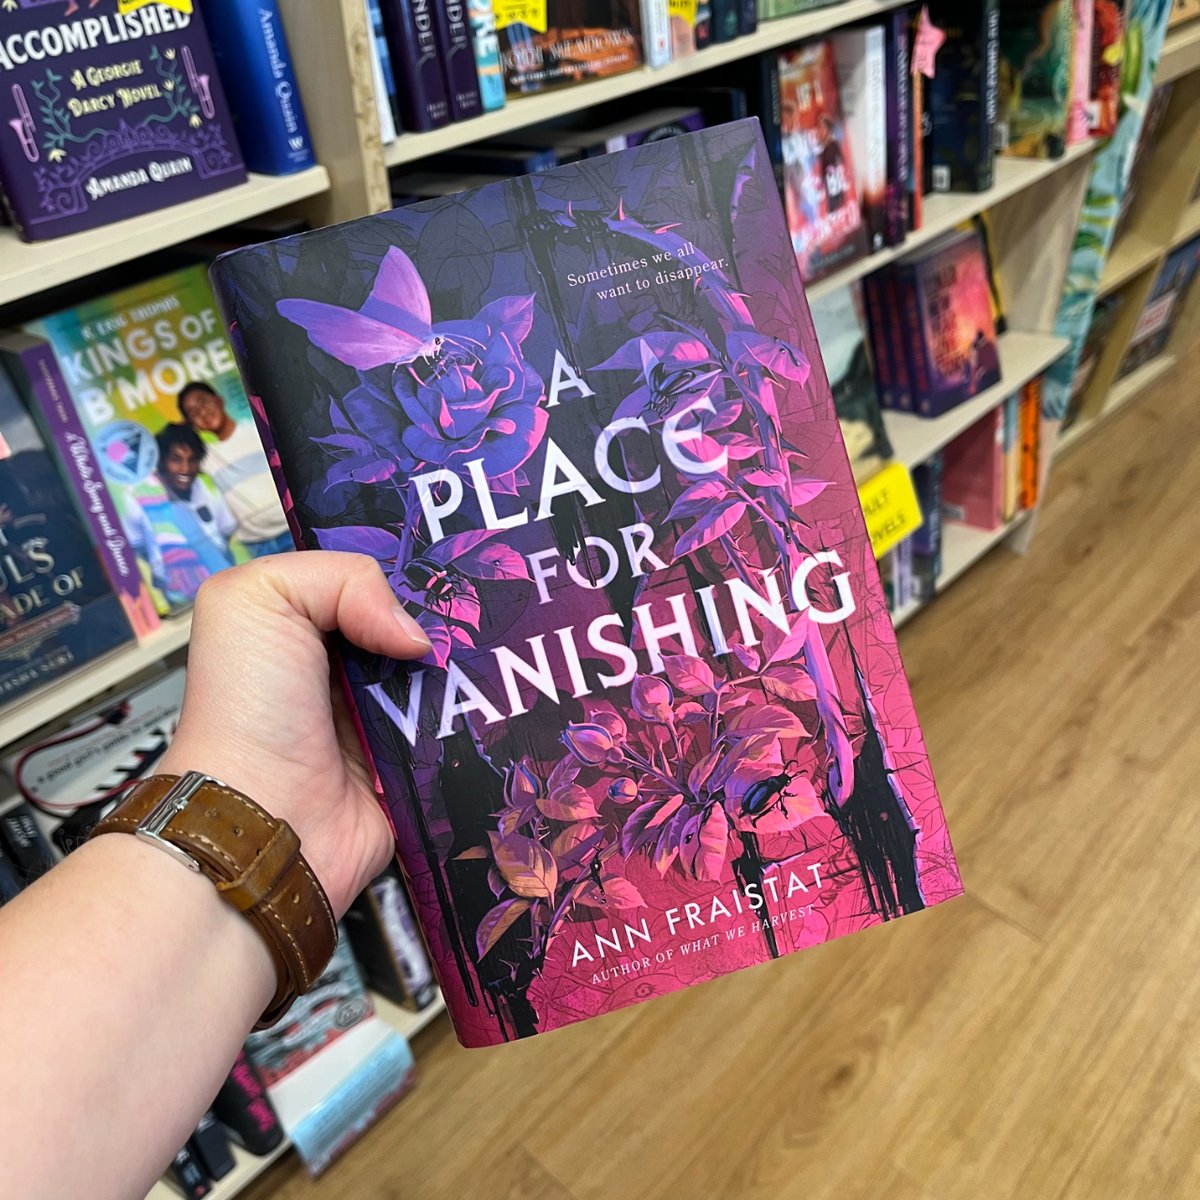 Snow may have gotten in the way last time, but we are so thrilled that (@annfrai will be here on Saturday to finally celebrate the release of her new book A PLACE FOR VANISHING. Join us on Saturday April 6th at 2pm to hear Ann in conversation with our very own @quainiac.